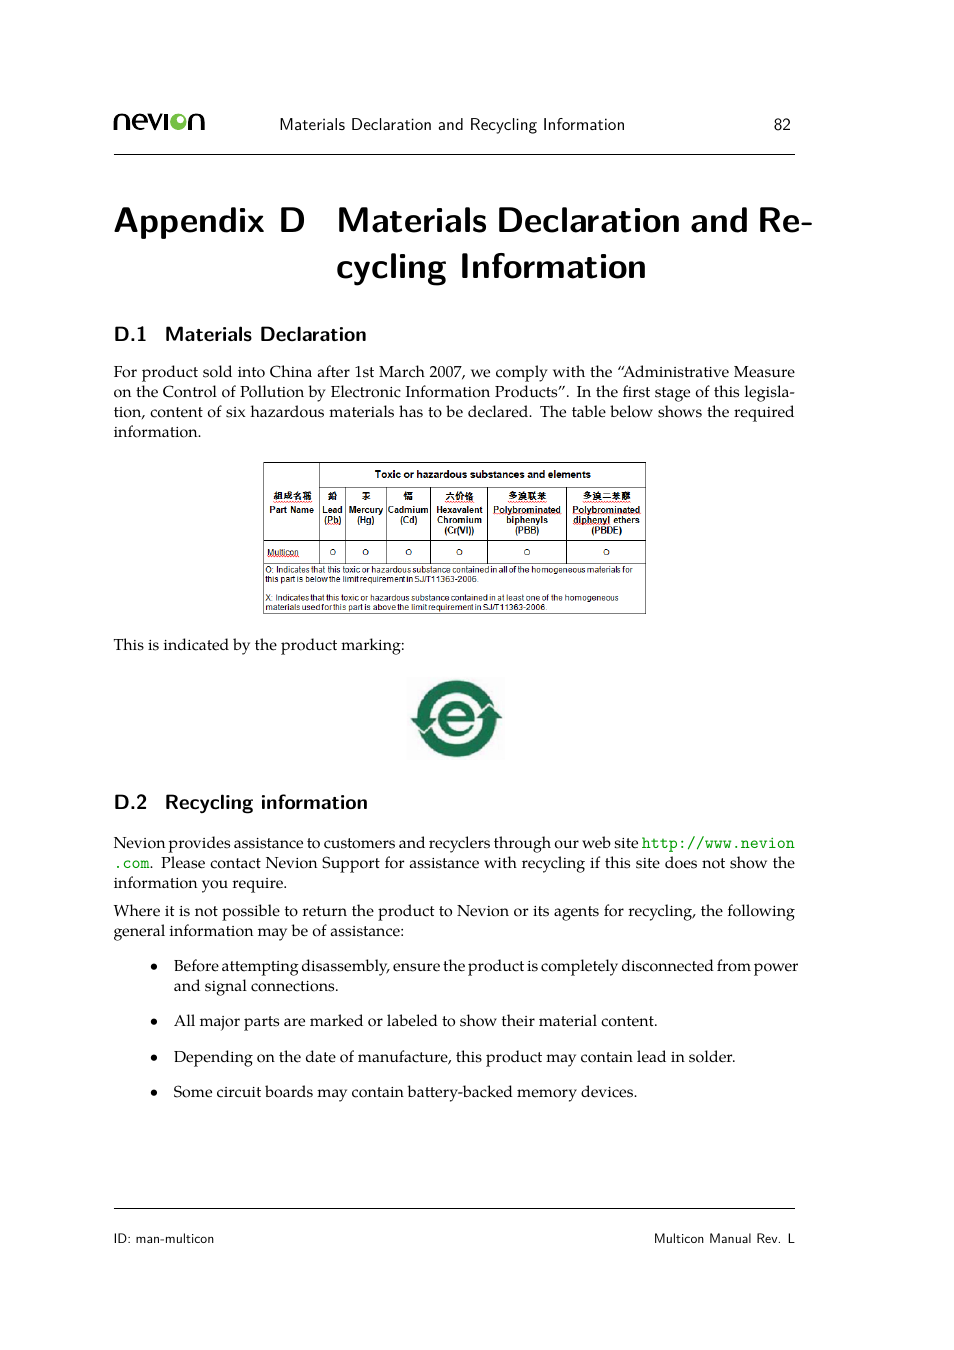 D materials declaration and recycling information, D.1 materials declaration, D.2 recycling information | Nevion Multicon User Manual | Page 82 / 83